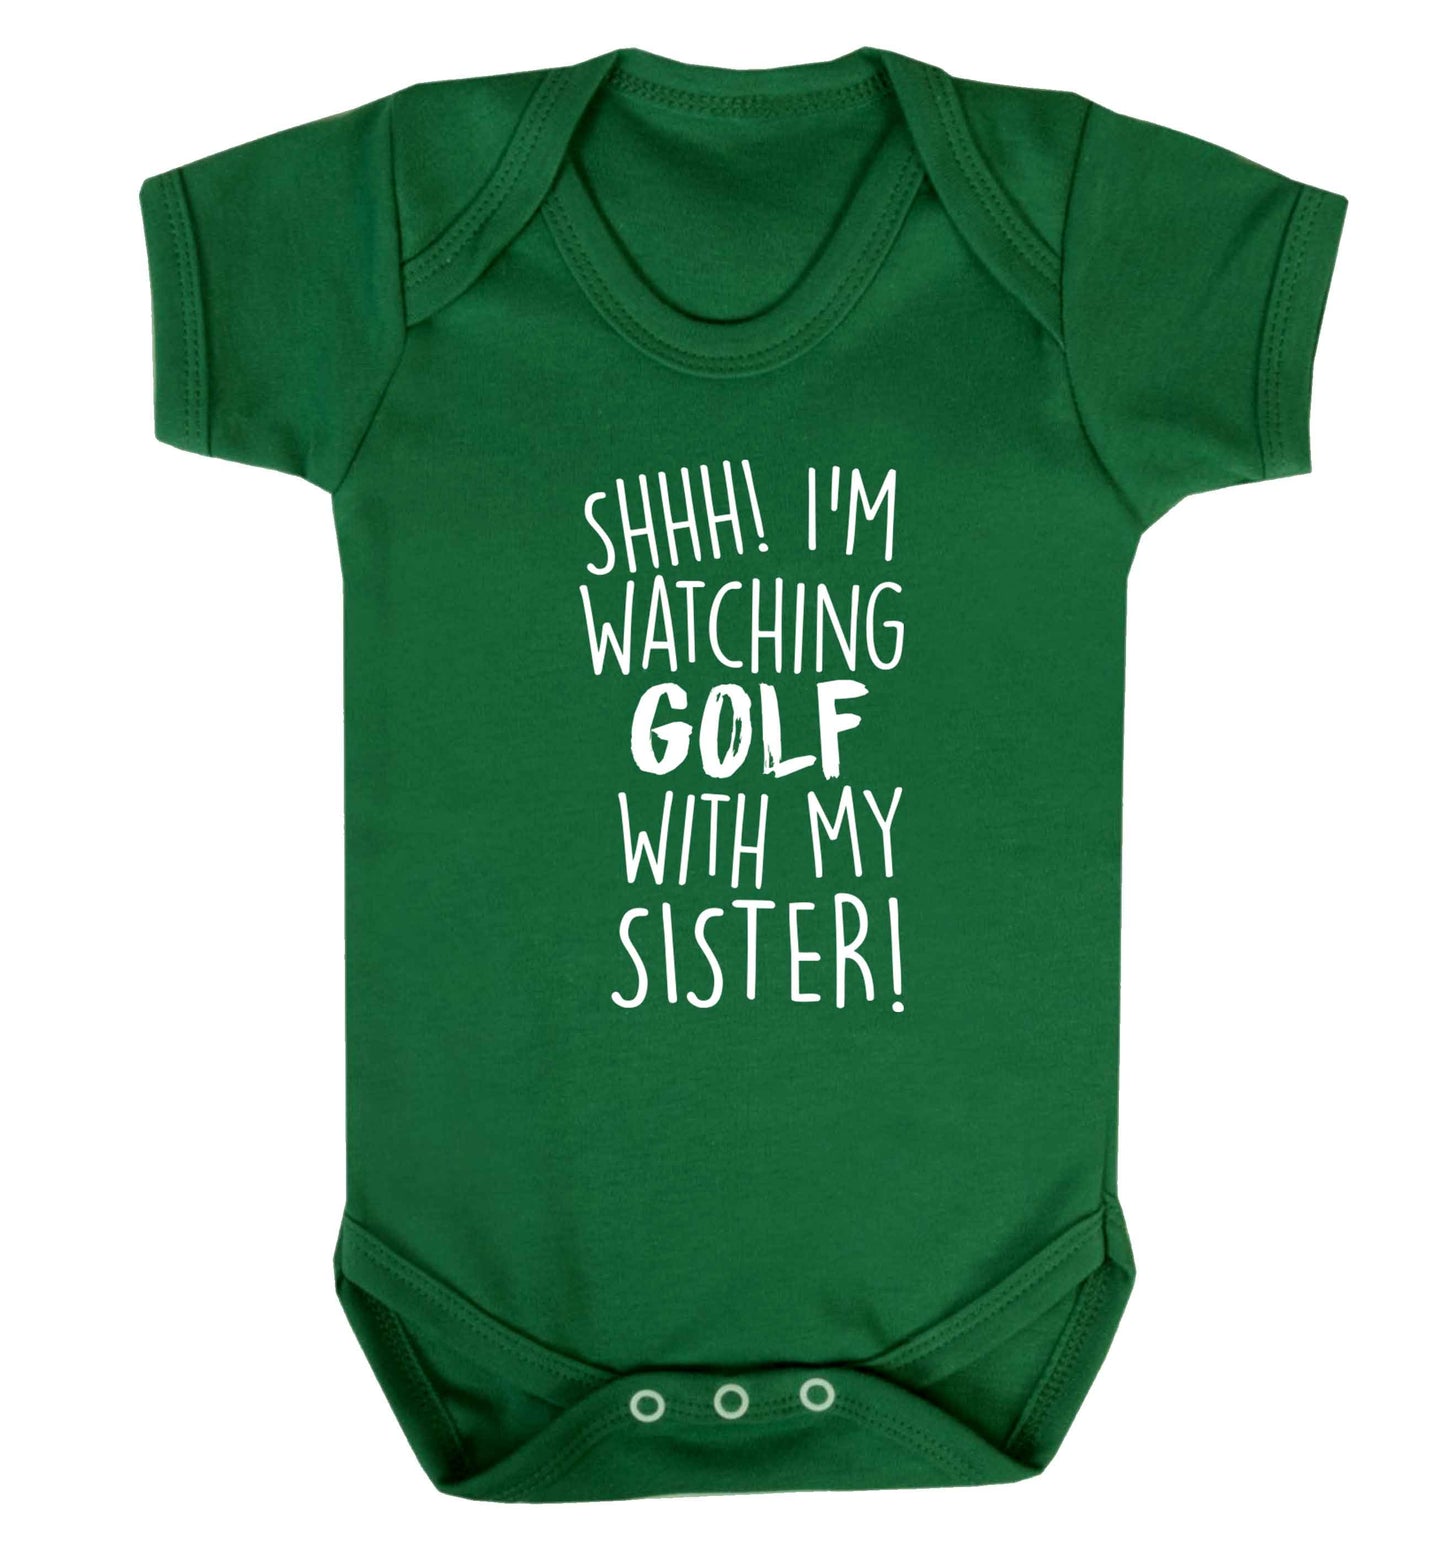 Shh I'm watching golf with my sister Baby Vest green 18-24 months